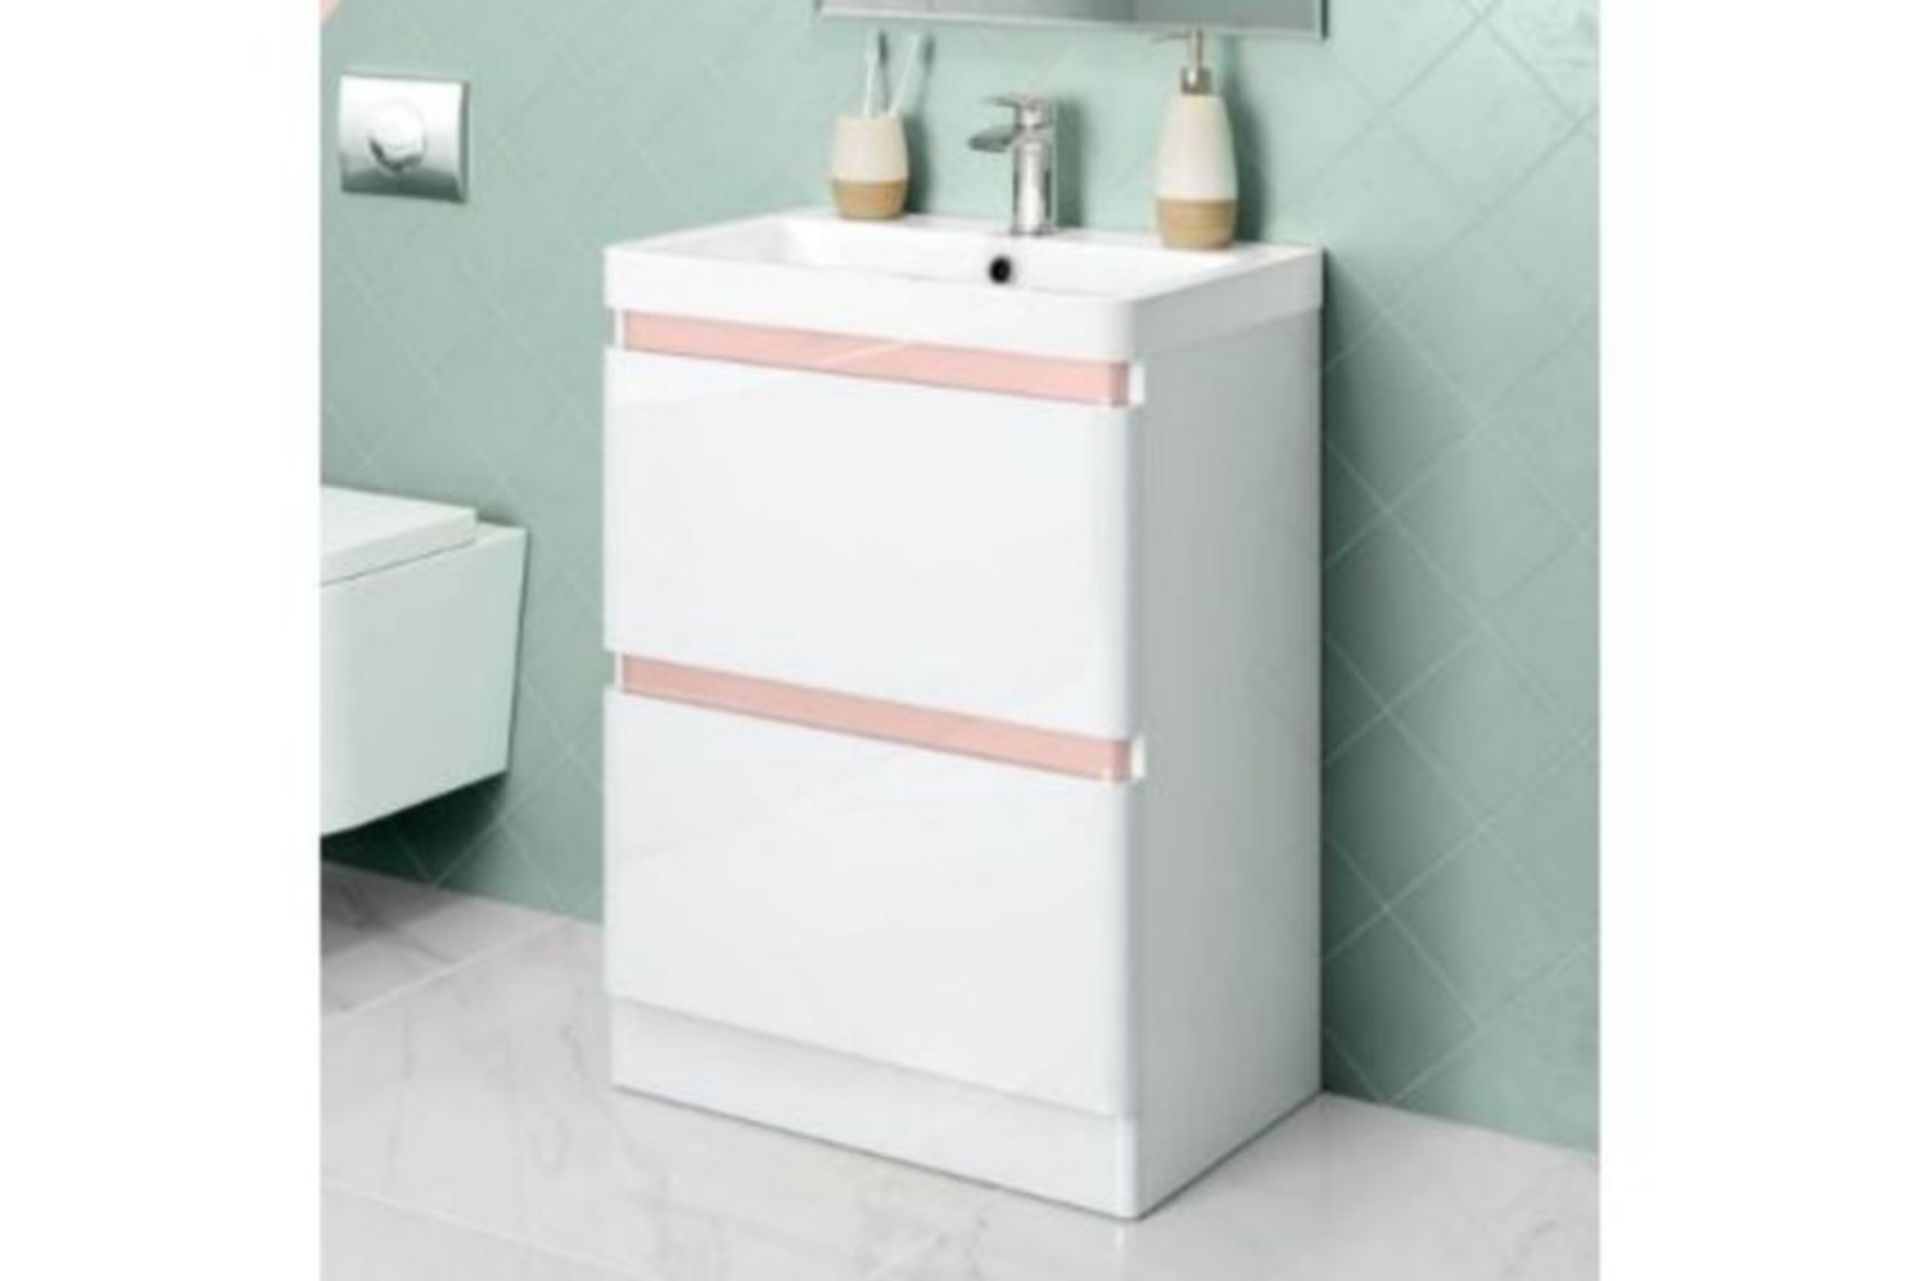 2 X New & Boxed 600mm Denver Floor Standing Vanity Unit - Rose Gold Edition. RRP £749.99.Comes